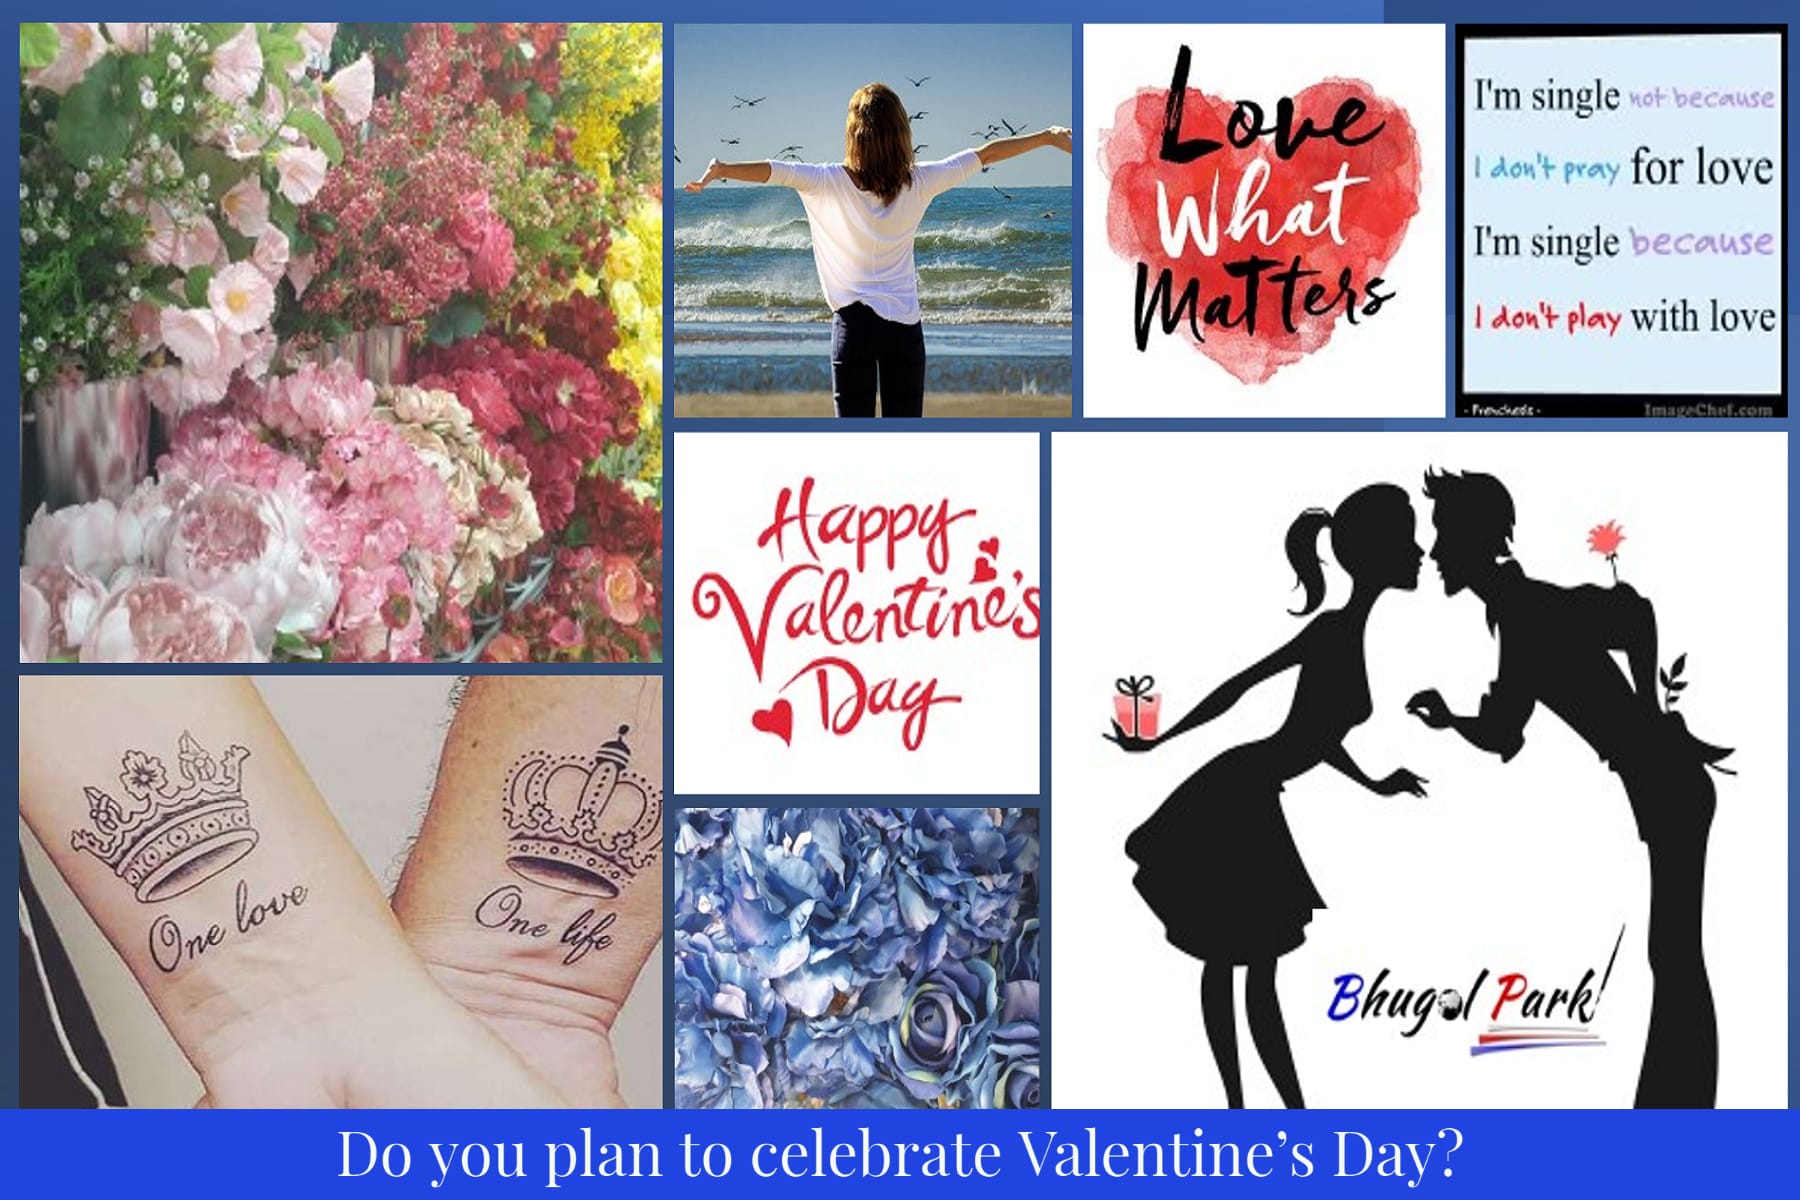 Do you plan to celebrate Valentine’s Day, the public opinion about it is as follows.